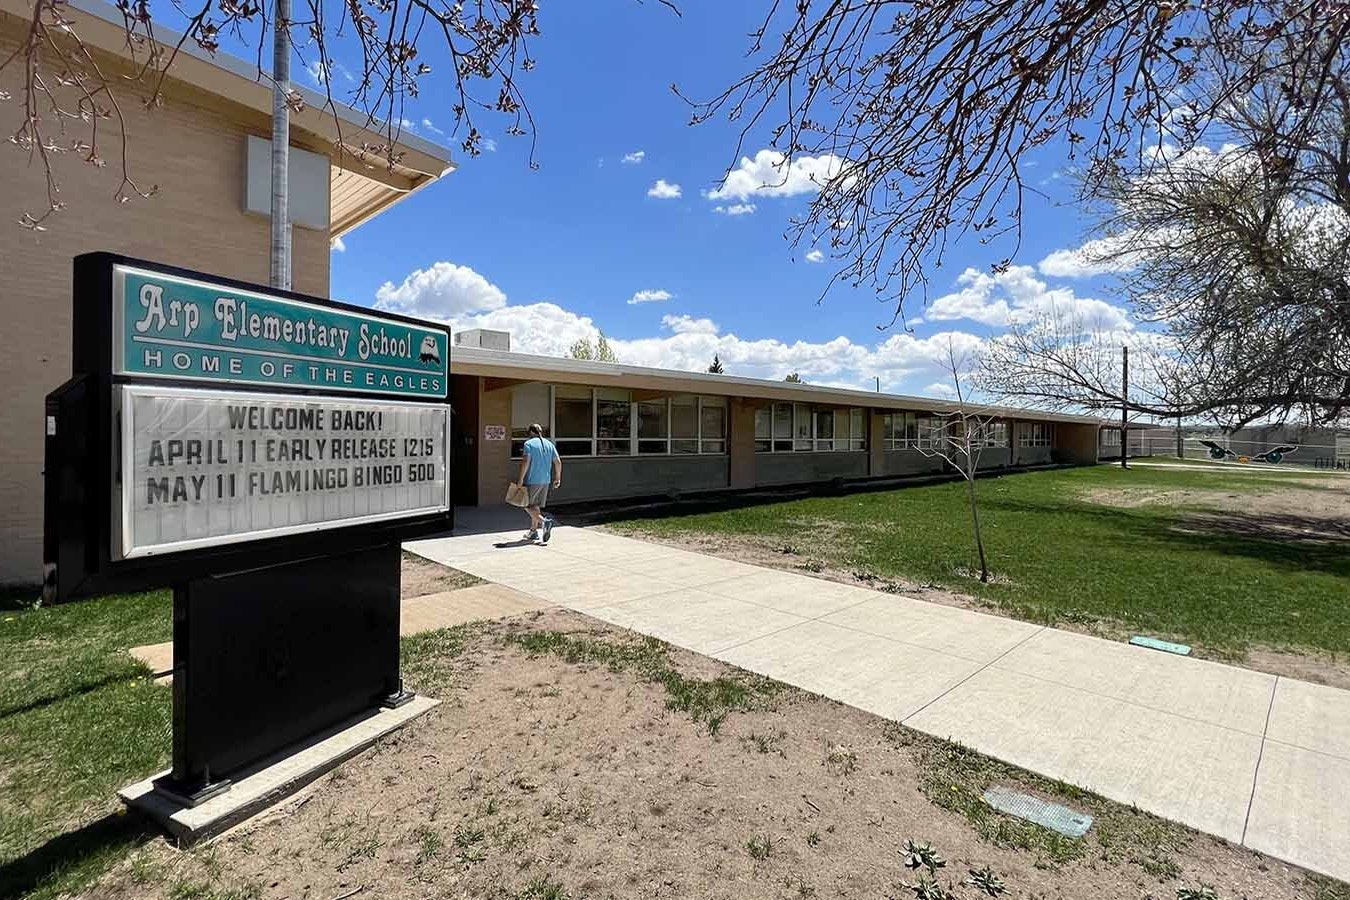 Arp Elementary School may be holding its last classes as it prepares to move into a vacant building next year pending a resolution to either upgrading or replacing its crumbling building.